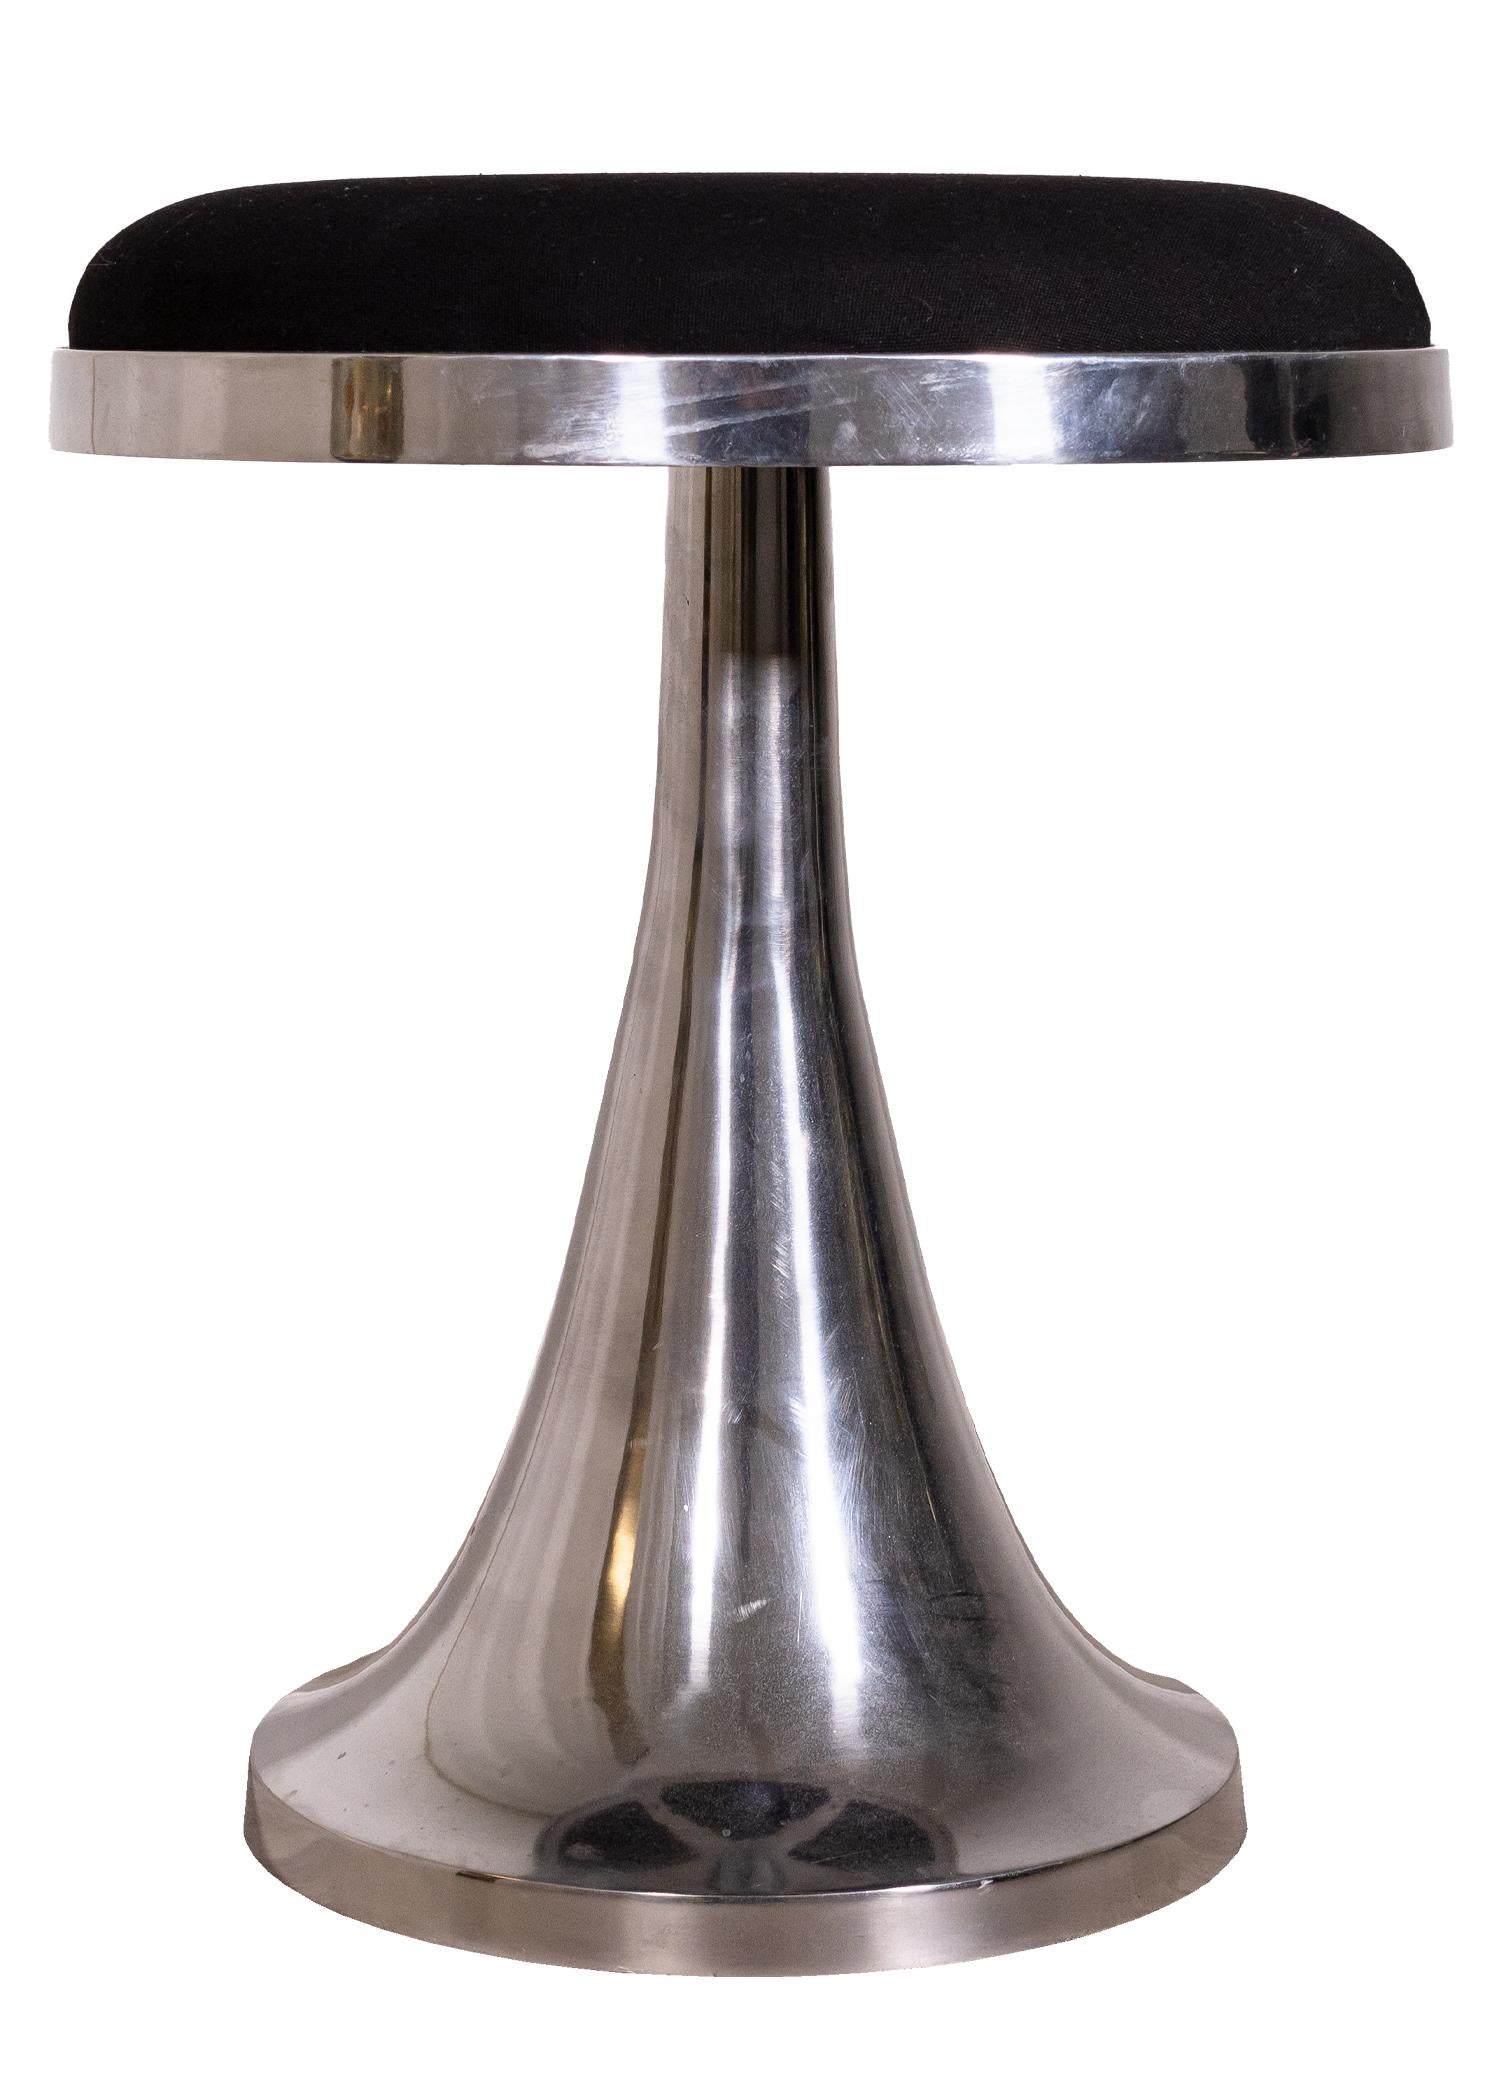 A mid century modern stainless steel tulip base swivel stool. A sophisticated vanity stool that features a chrome stainless steel finish and a black fabric cushion. This piece has a very durable, solid frame. It is in very good condition, with very